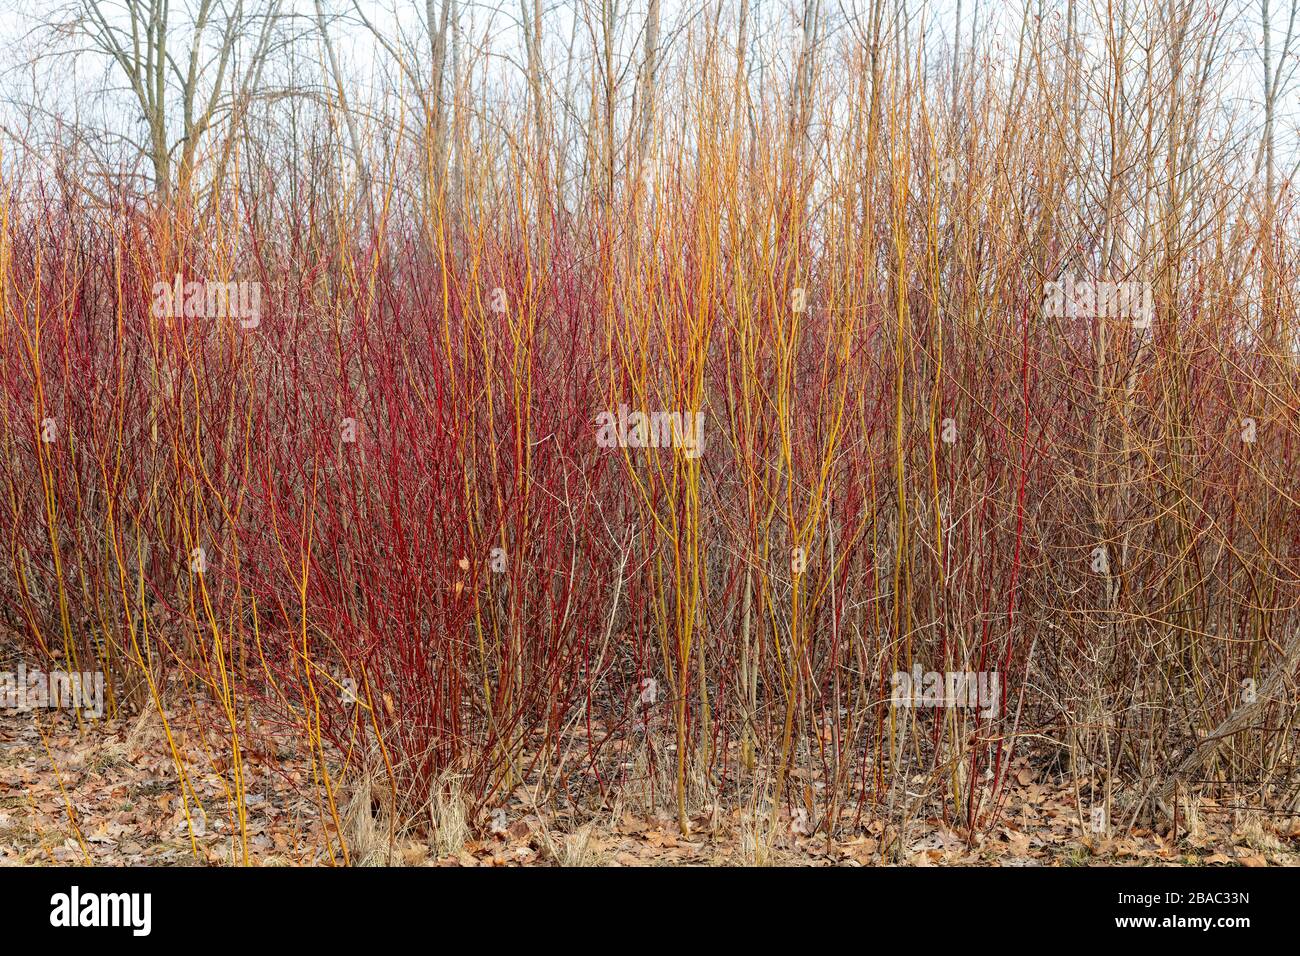 New growth of Willow cultivar, probably Flame or Red Willow E USA, by James D Coppinger/Dembinsky Photo Assoc Stock Photo